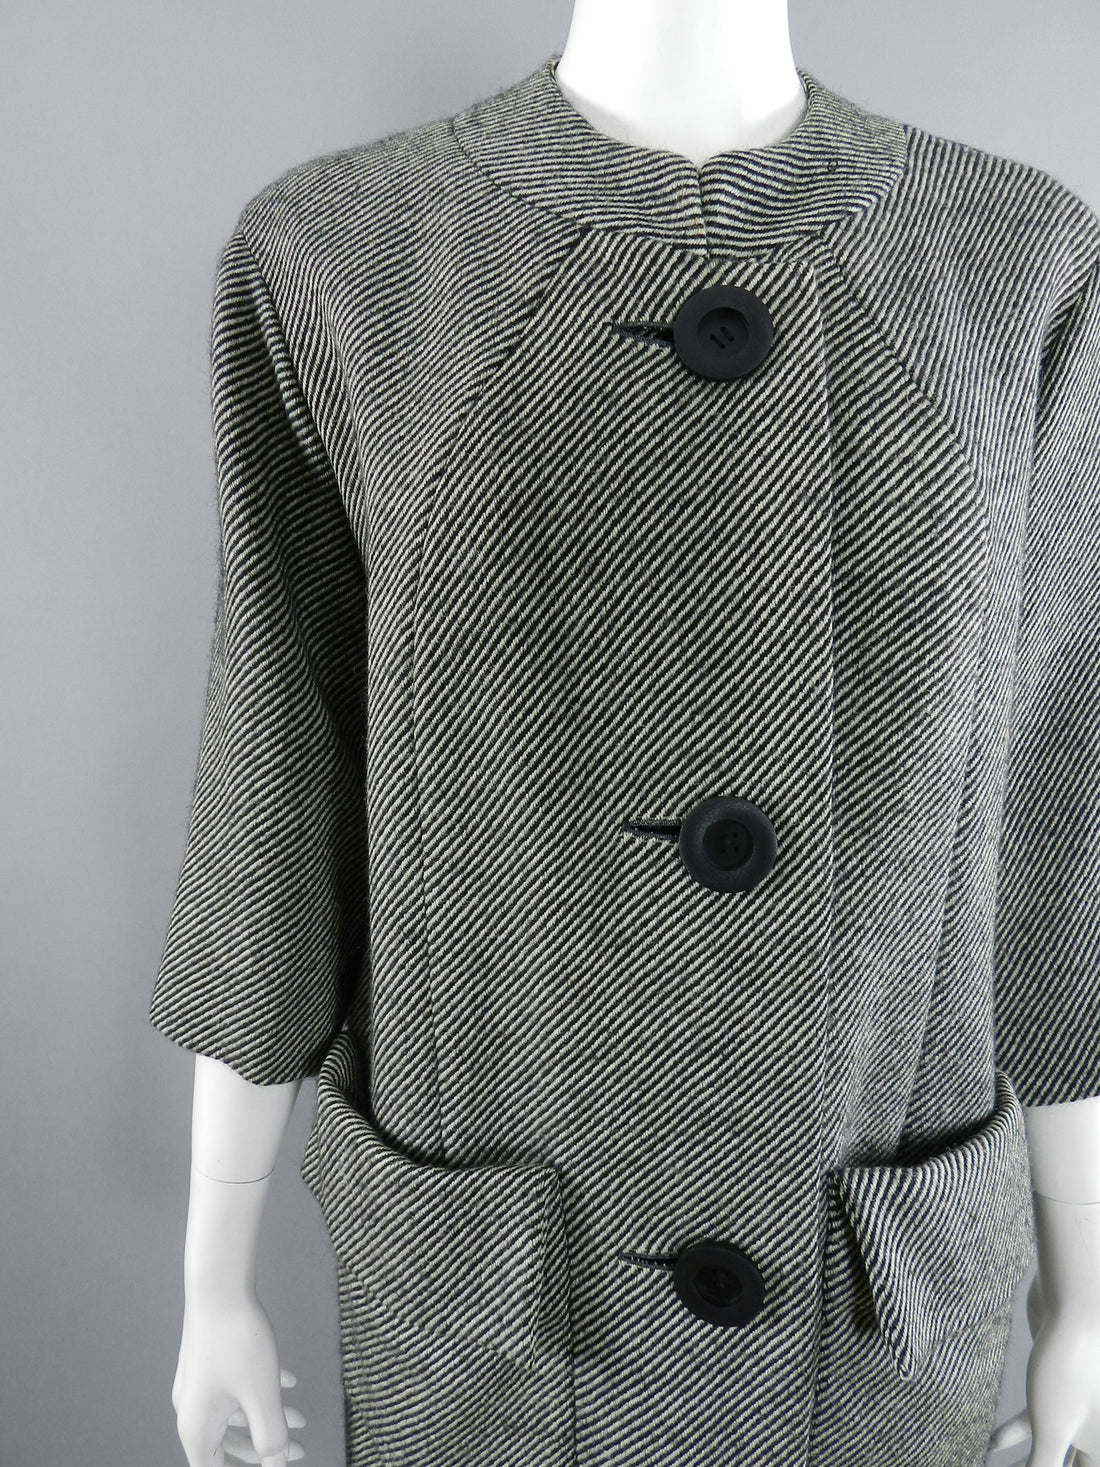 Pierre Cardin Jeunesse 1960's Black and White Tweed Wool Skirt and Coat Set